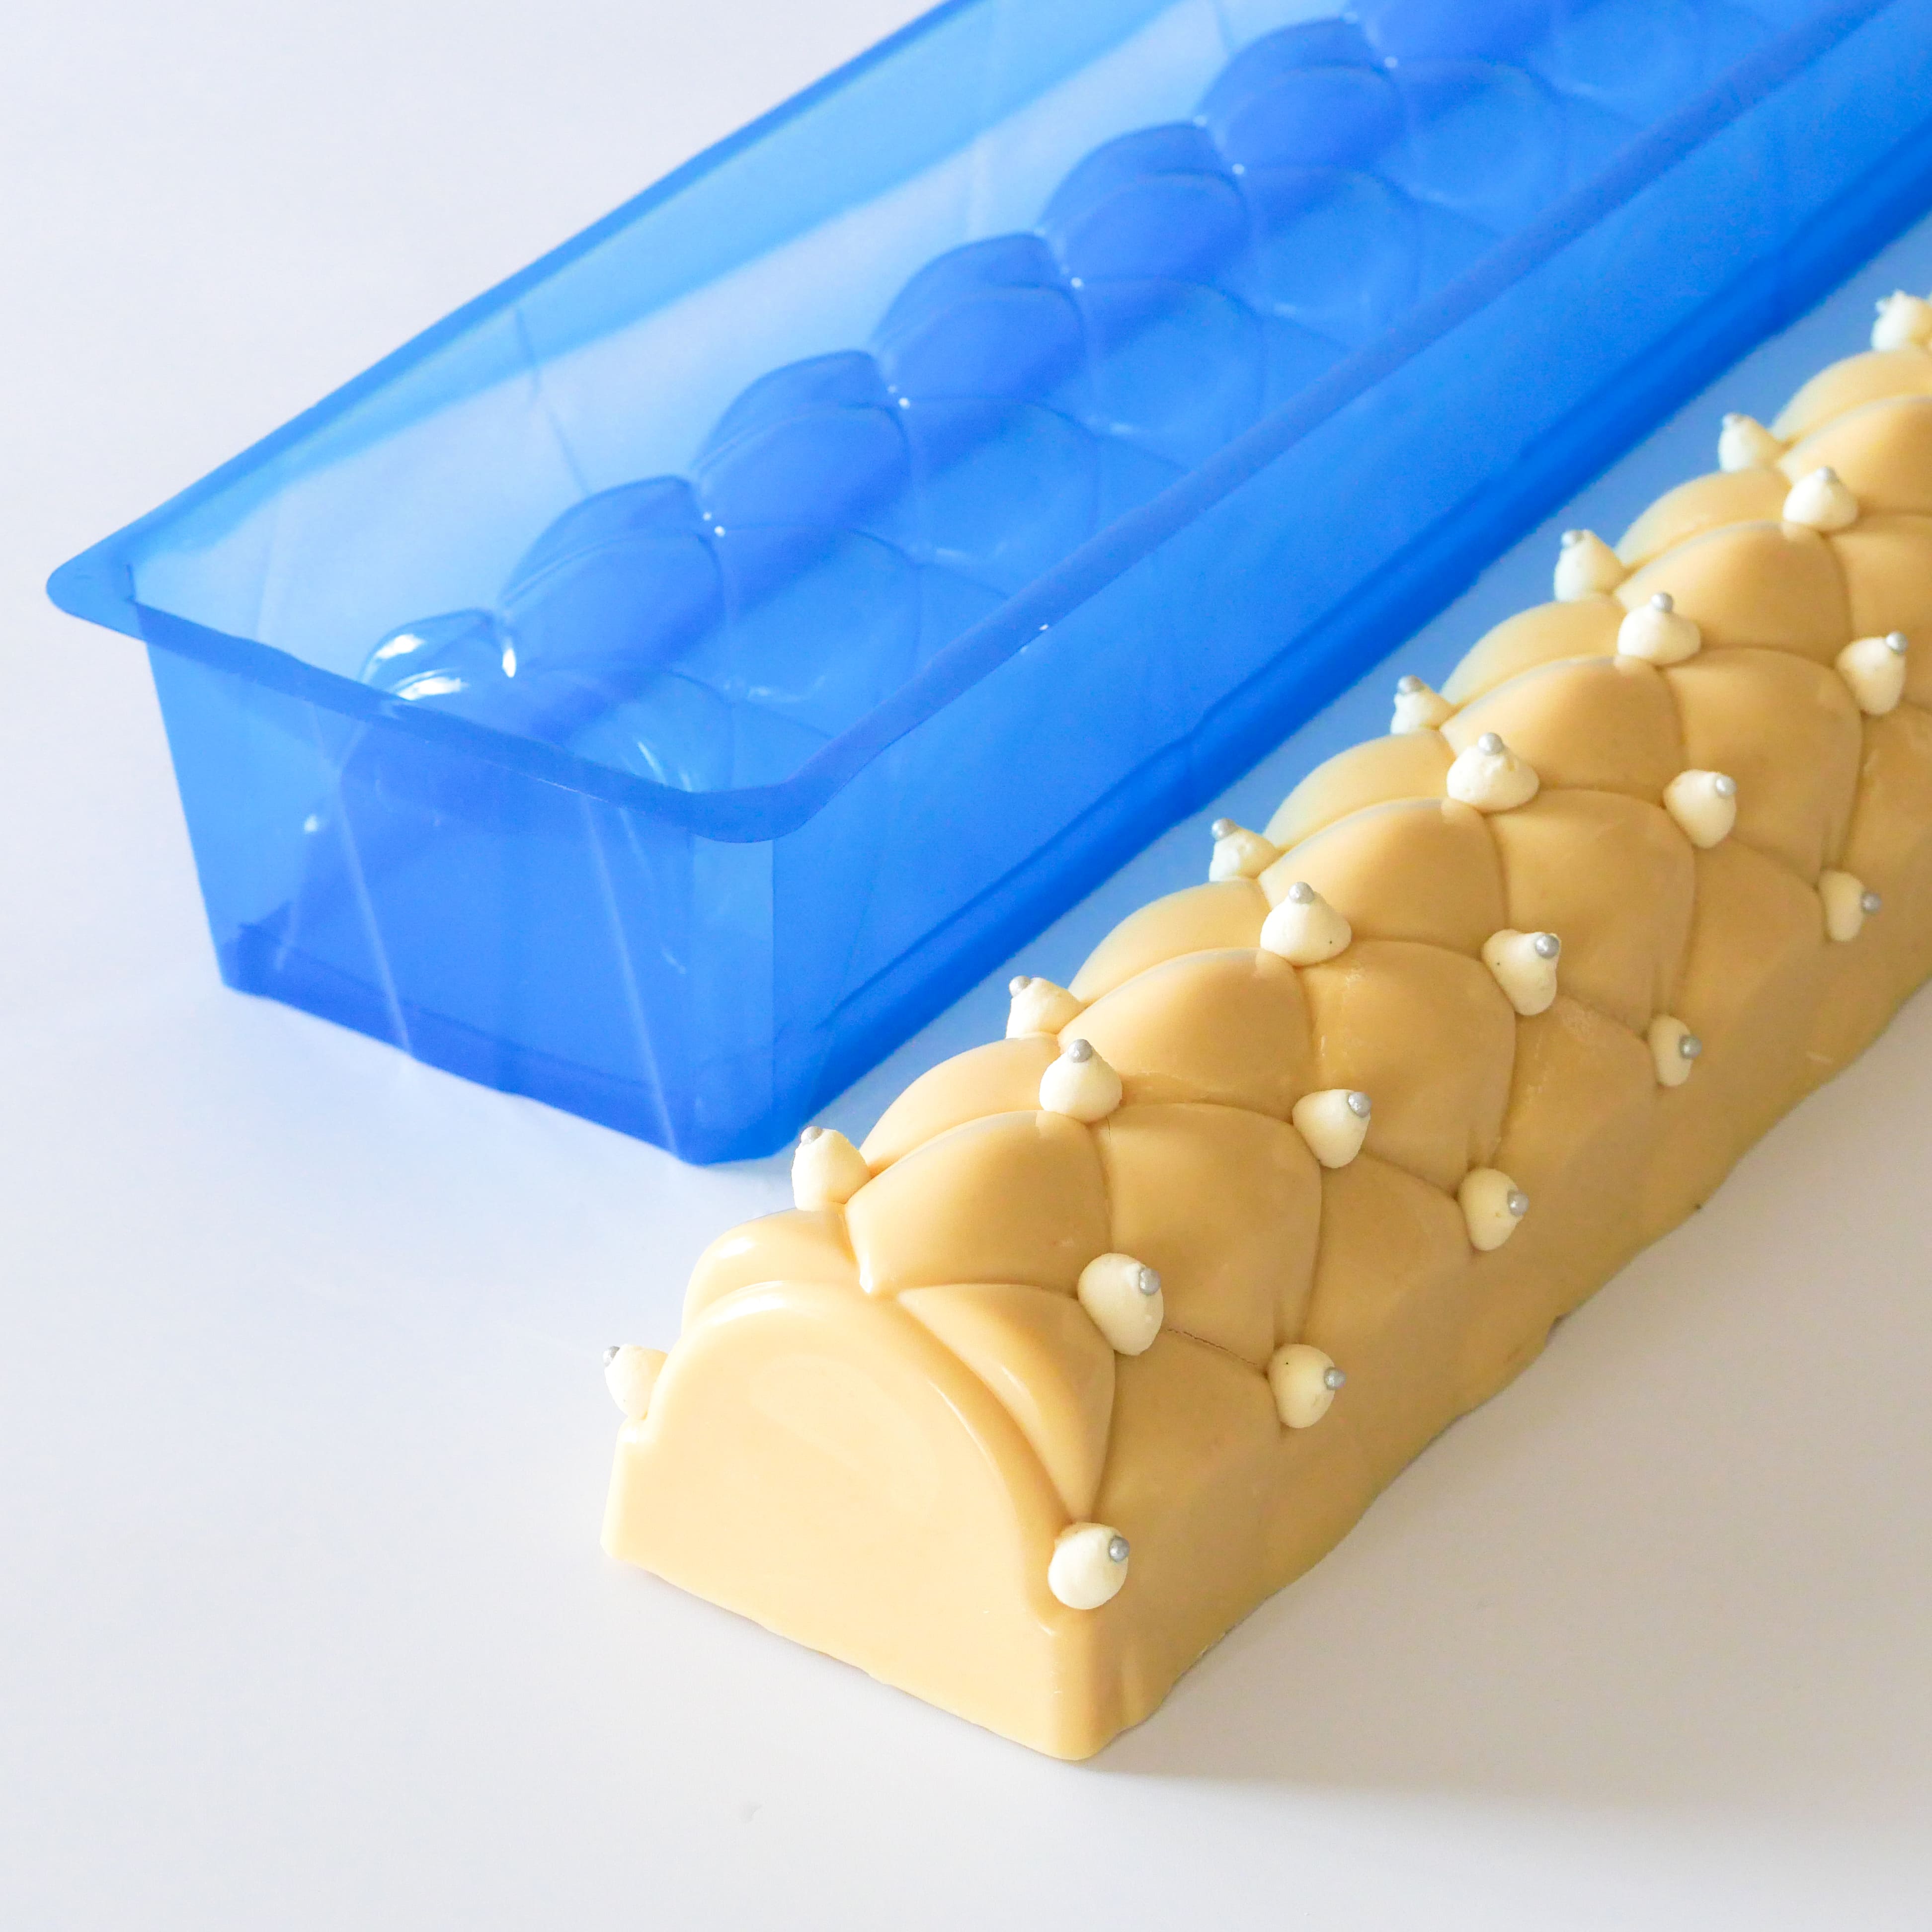 Thermoforming of pastry molds